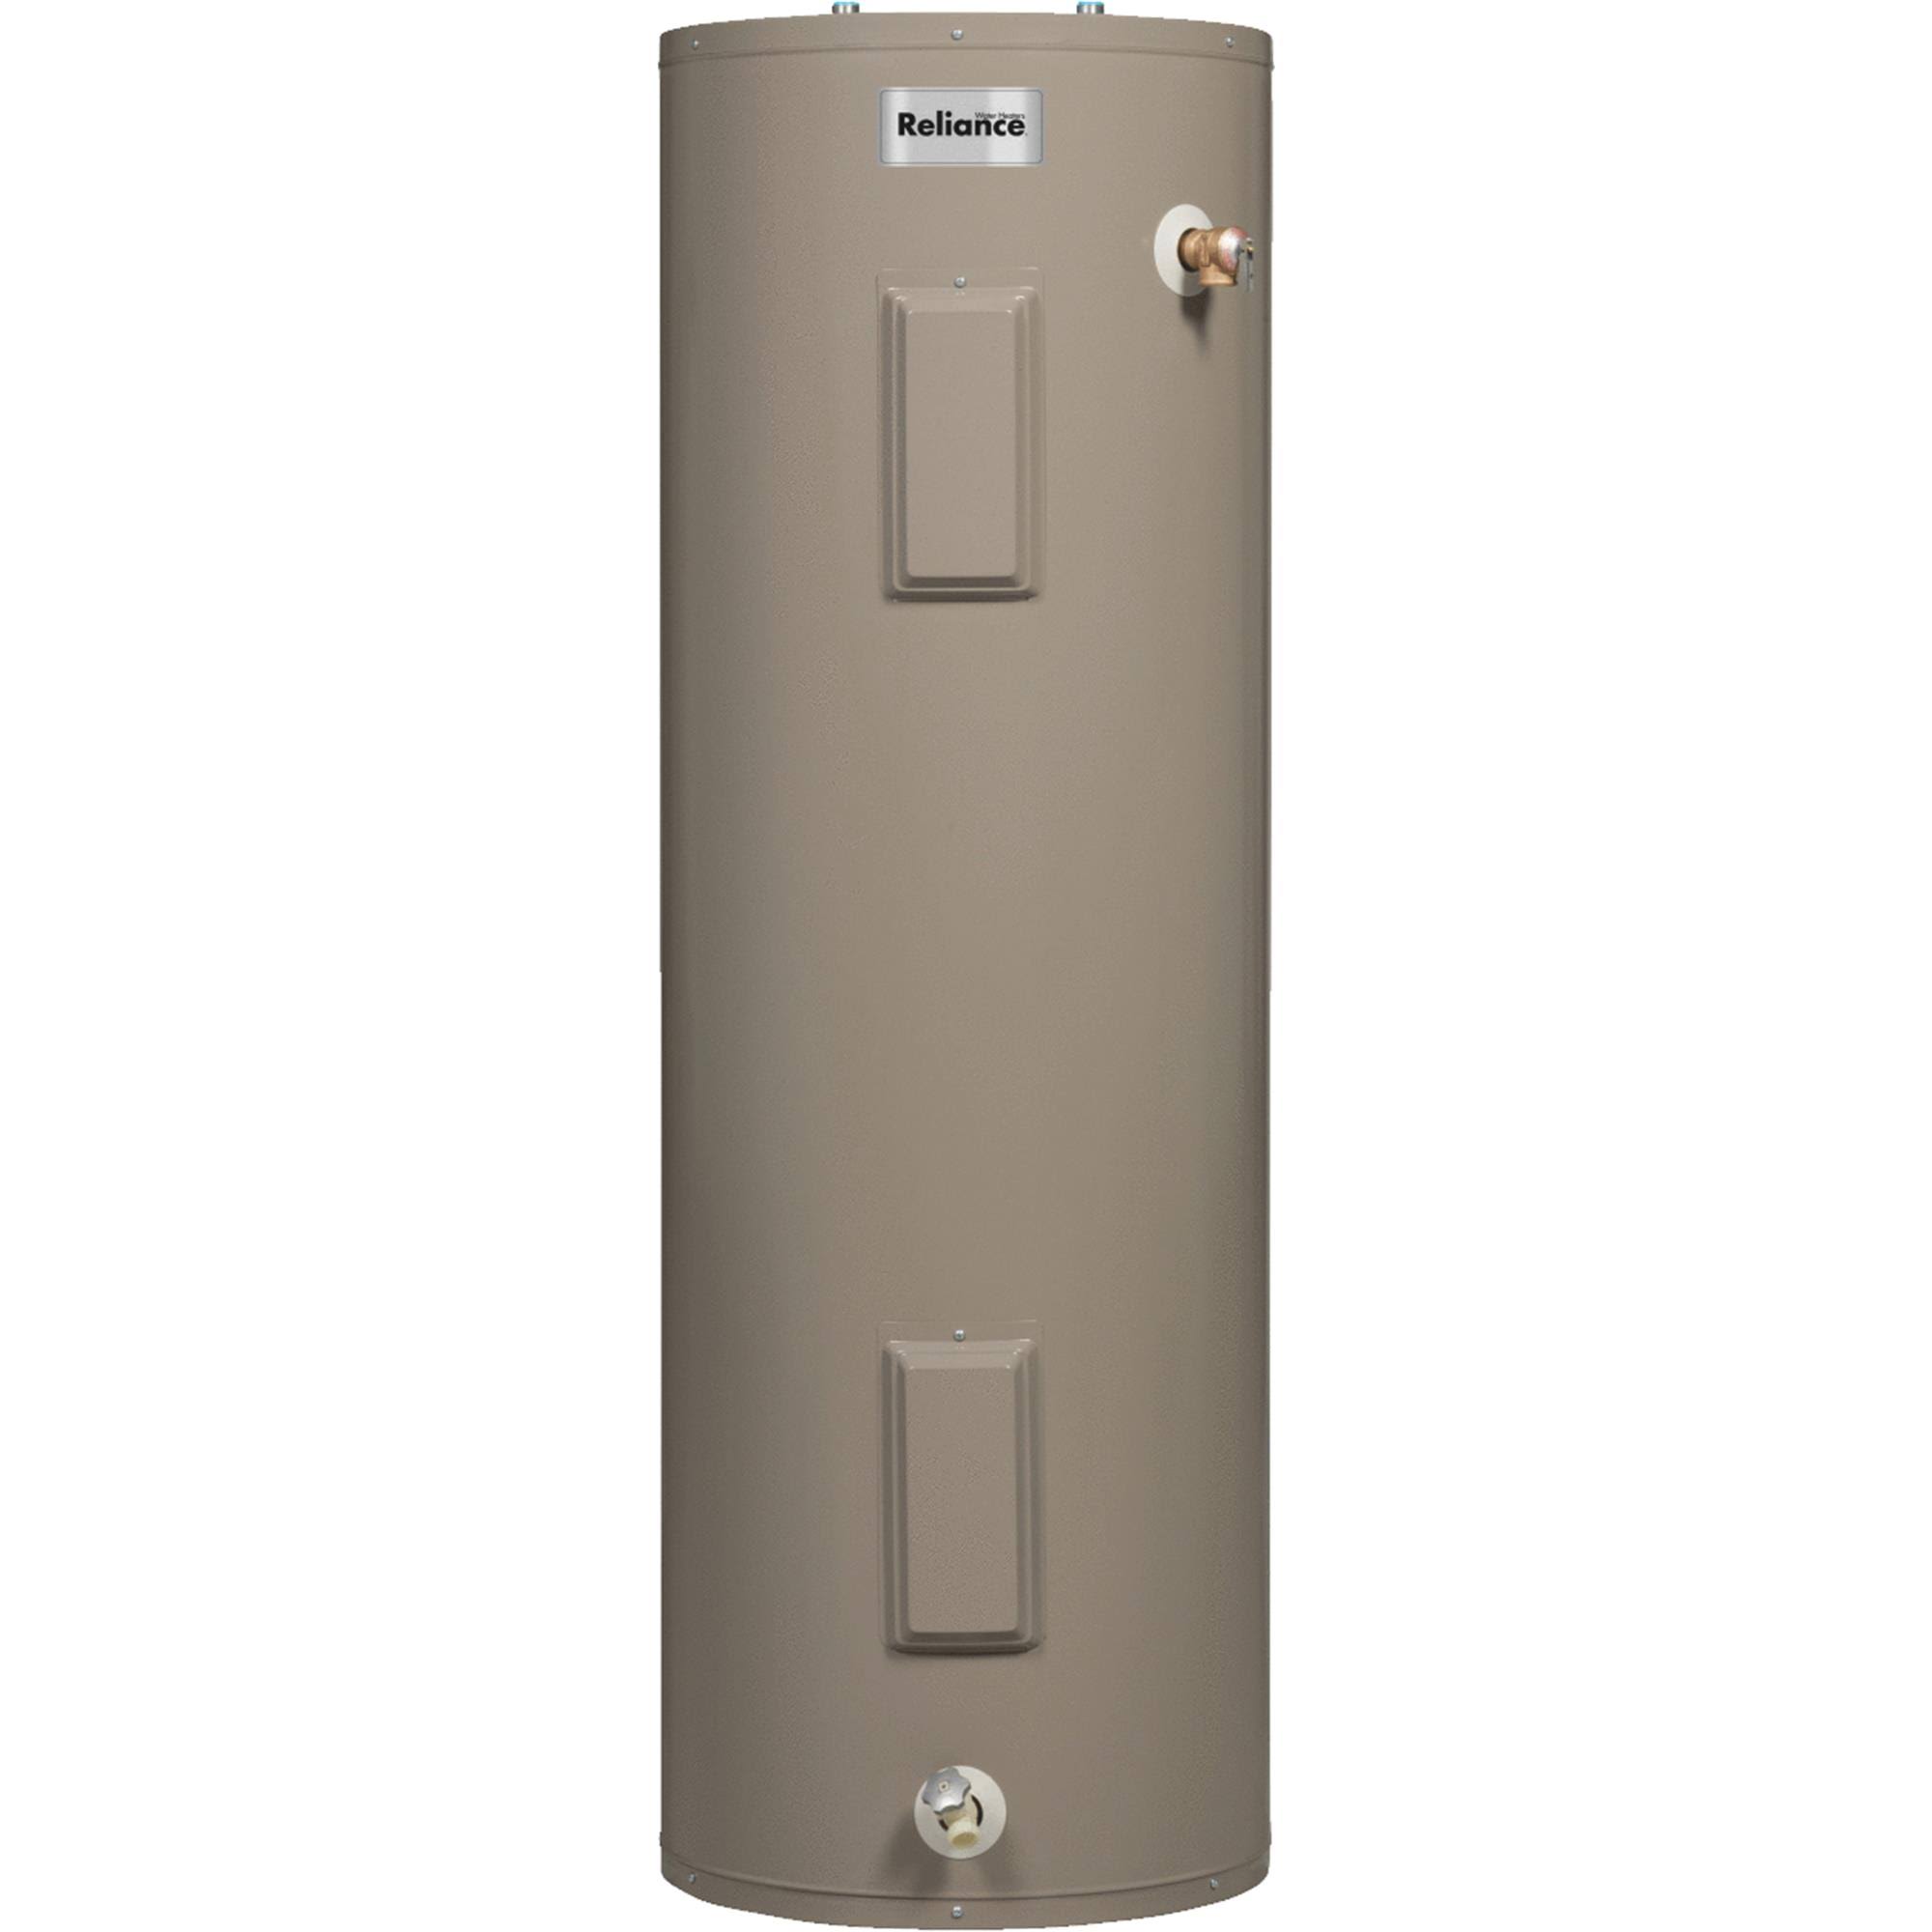 Reliance Electric Water Heater - 46.75", 30 Gal